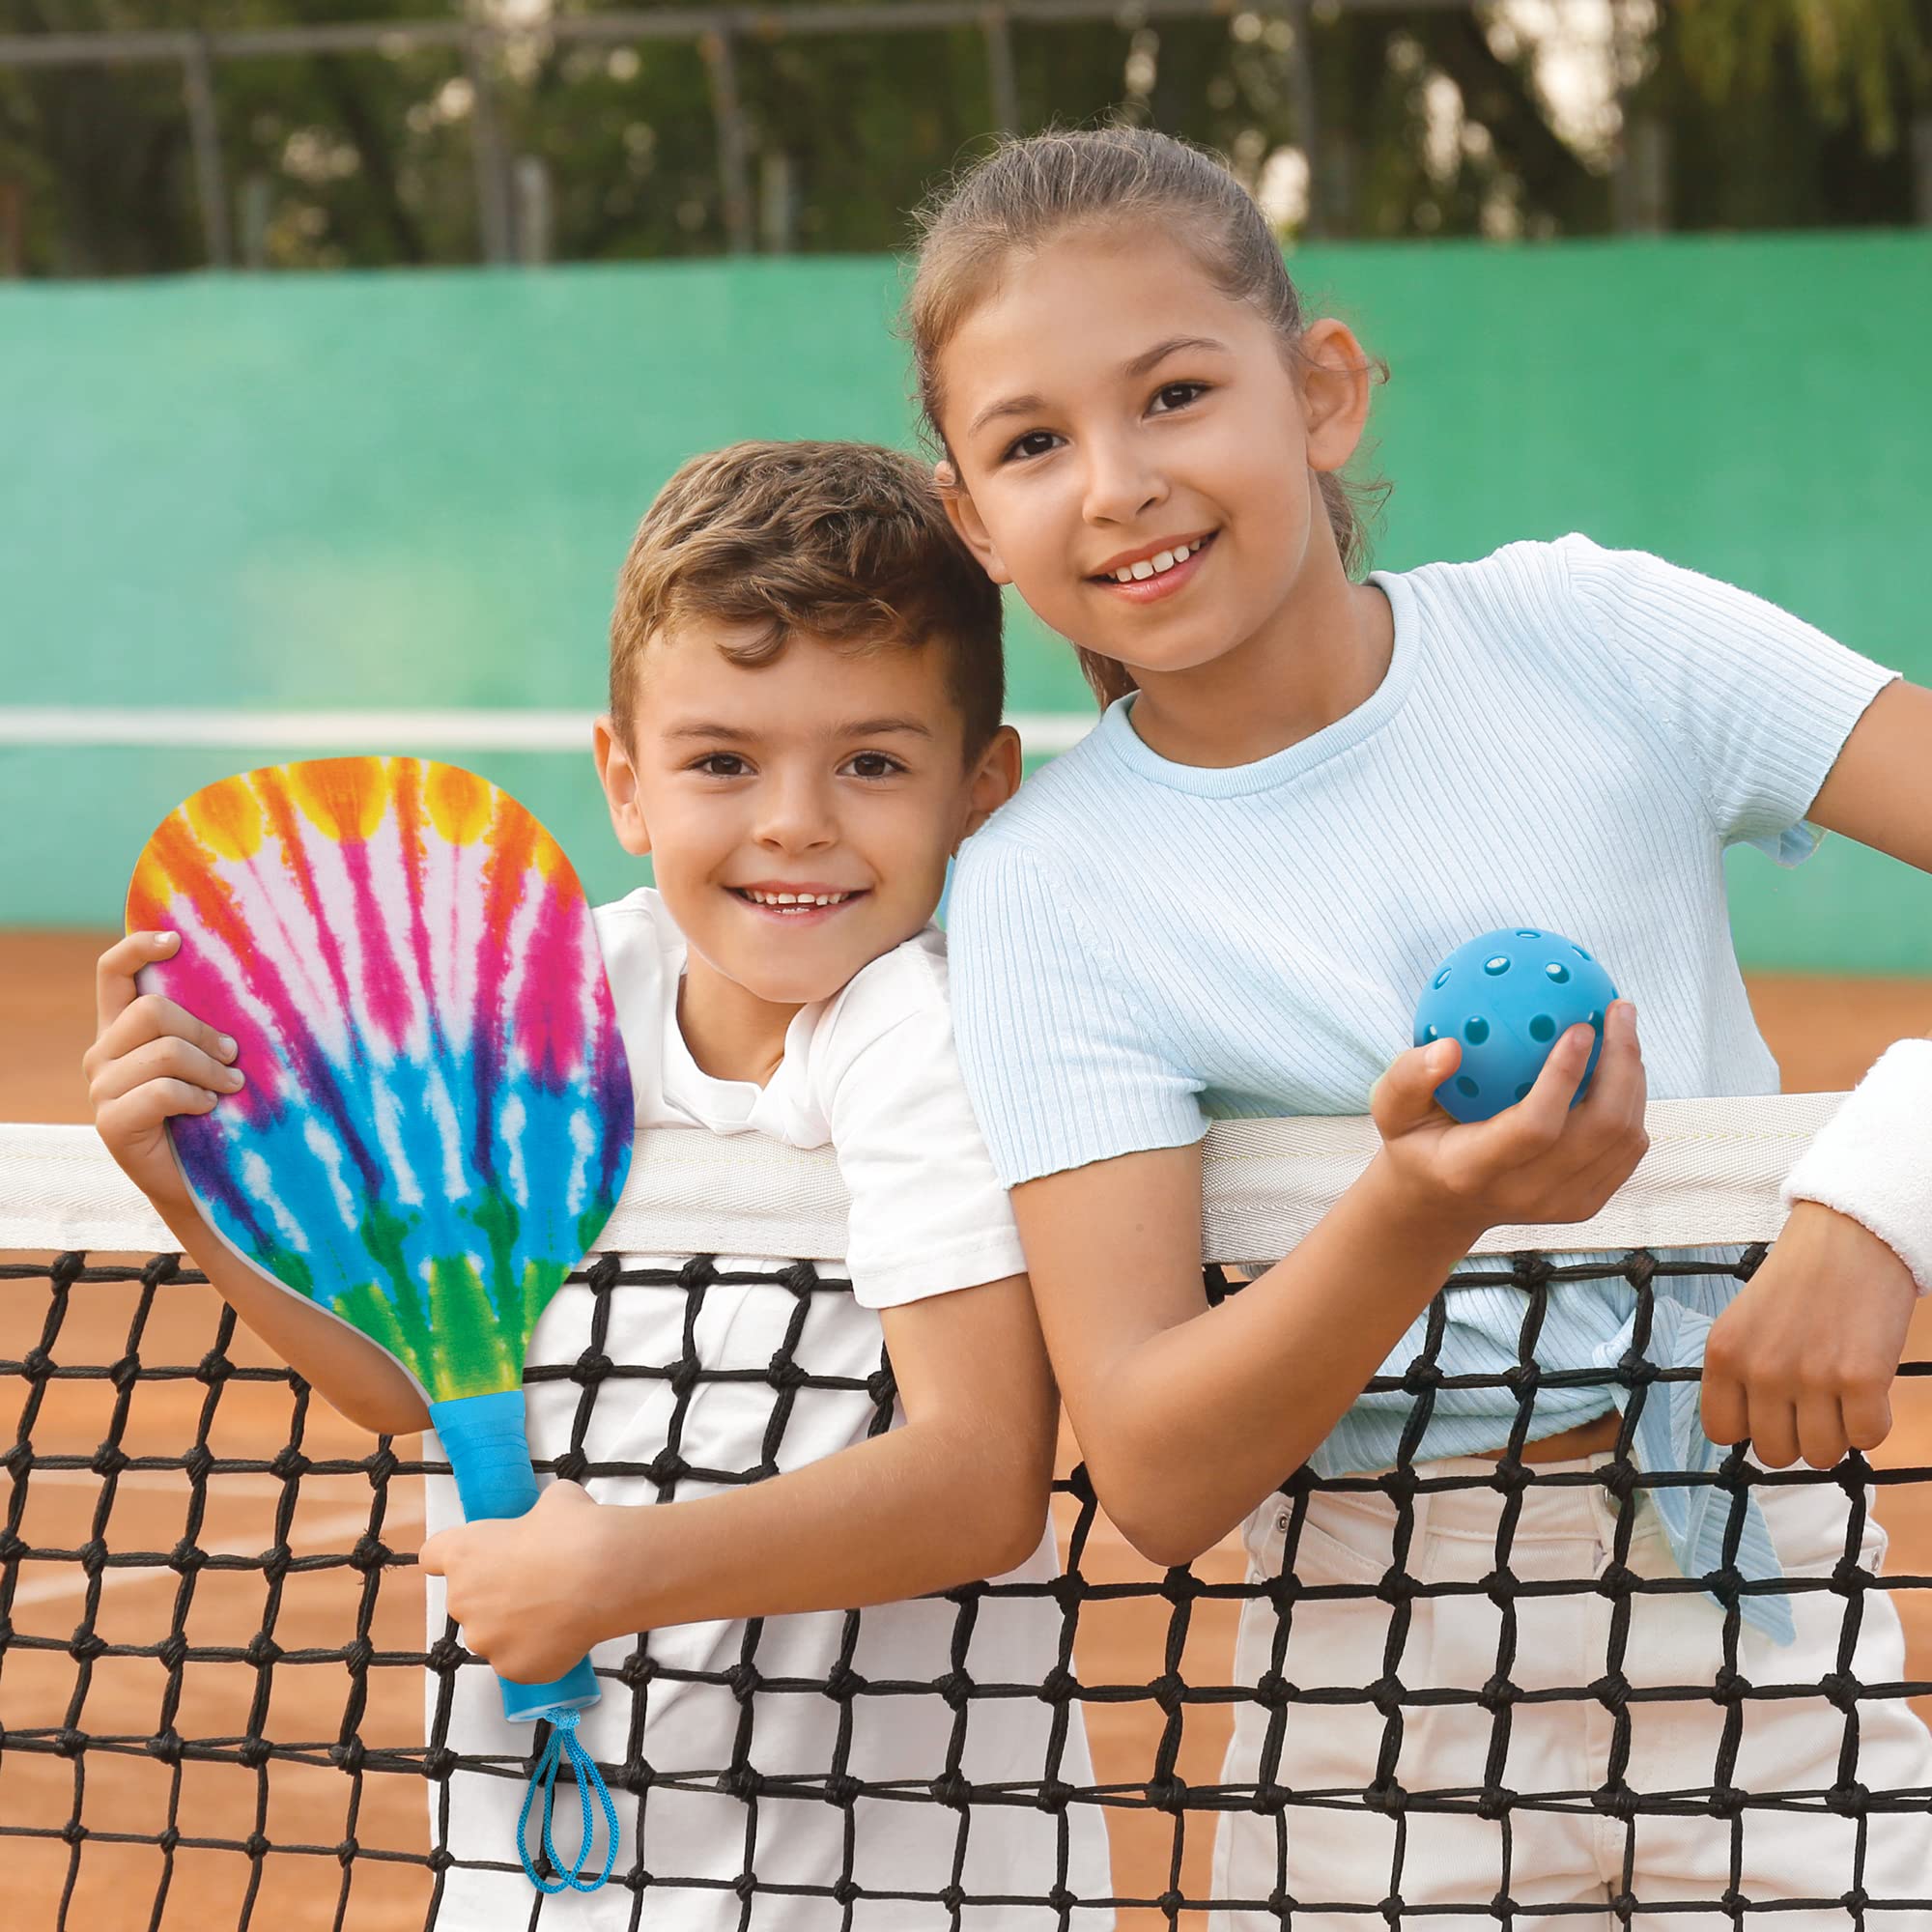 Make It Real 3C4G: Tie Dye 2 Person Pickleball Set - Play Pickleball Anywhere Your Heart Desires, Drawstring Dag Included, Three Cheers for Girls, Tween & Girls, Kids Ages 8+